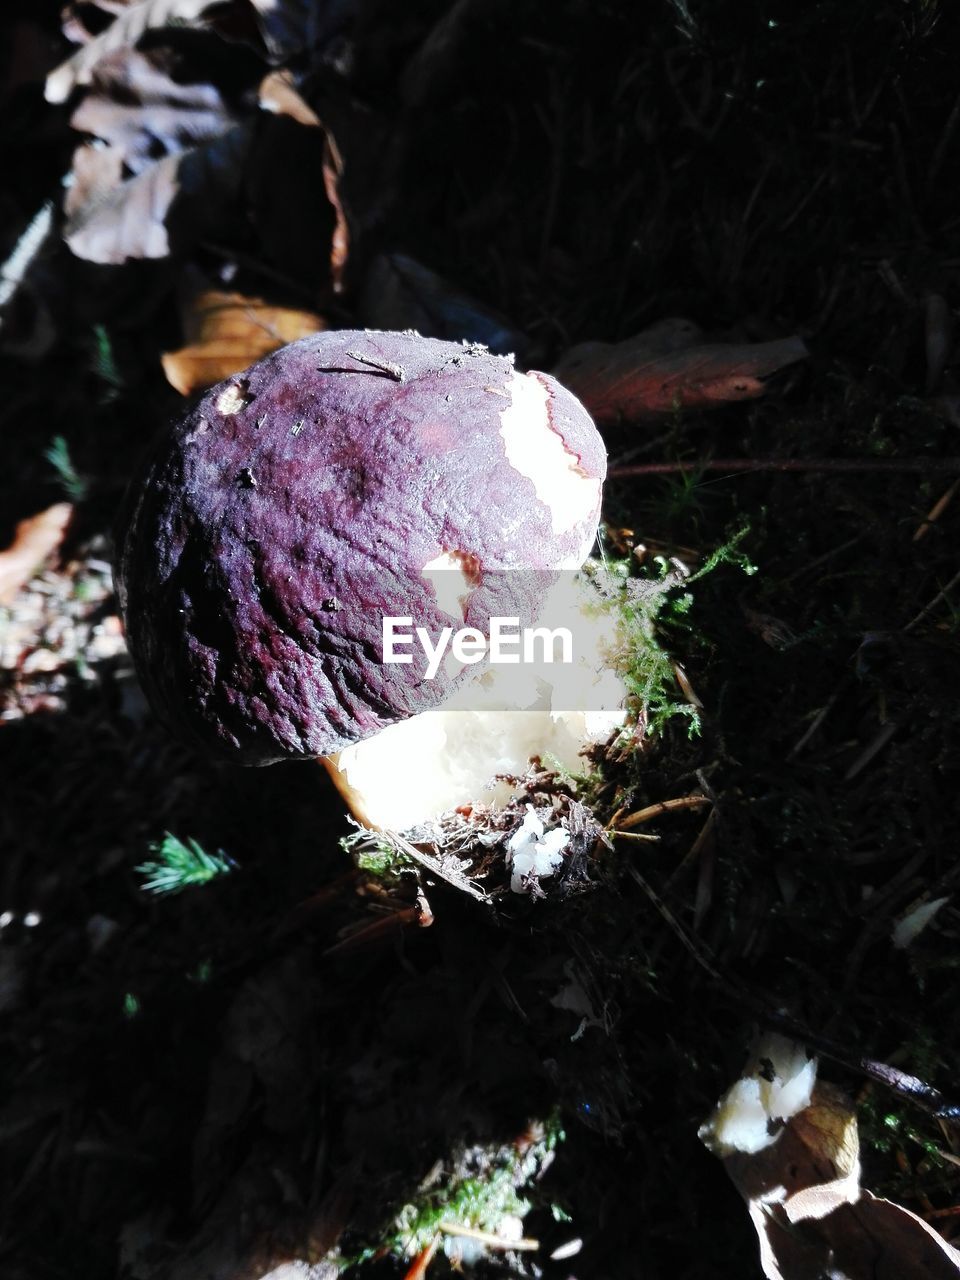 HIGH ANGLE VIEW OF MUSHROOMS GROWING ON FIELD